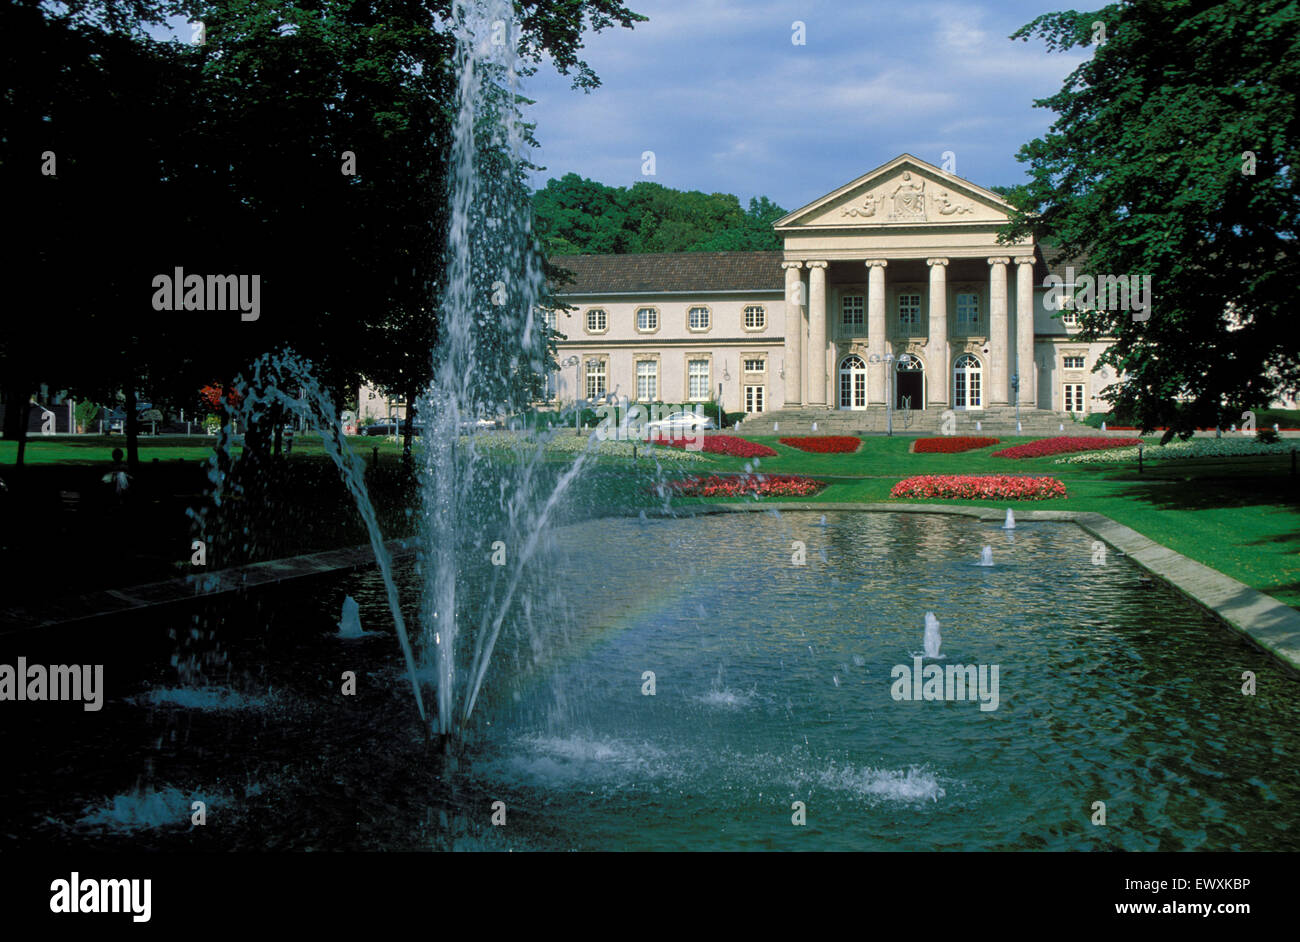 Deu Germany Aachen The Casino Fountain At The Gardens Of The